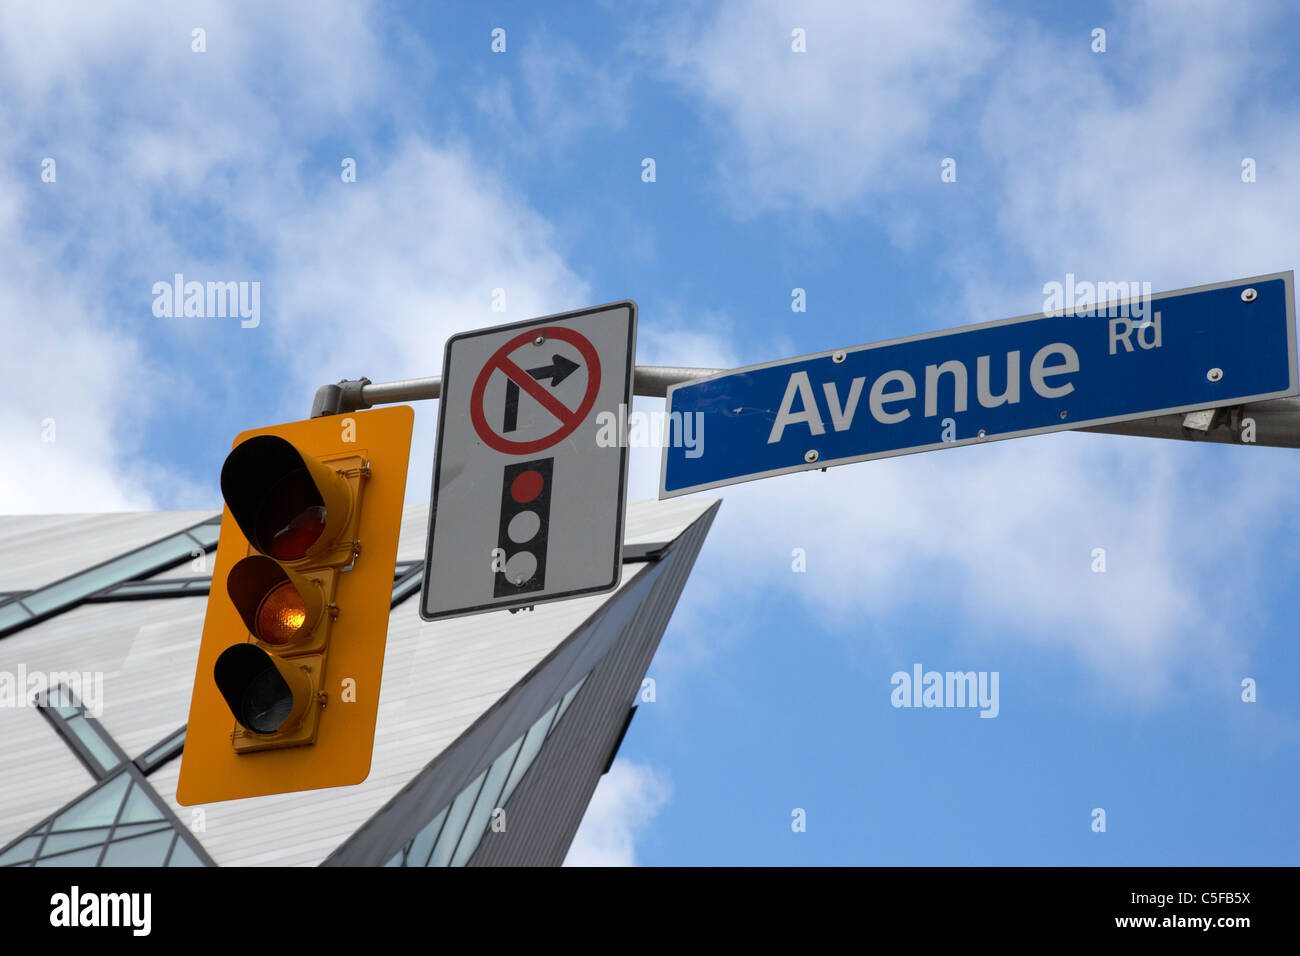 traffic light signals and no right turn on red signs in avenue road downtown toronto ontario canada Stock Photo